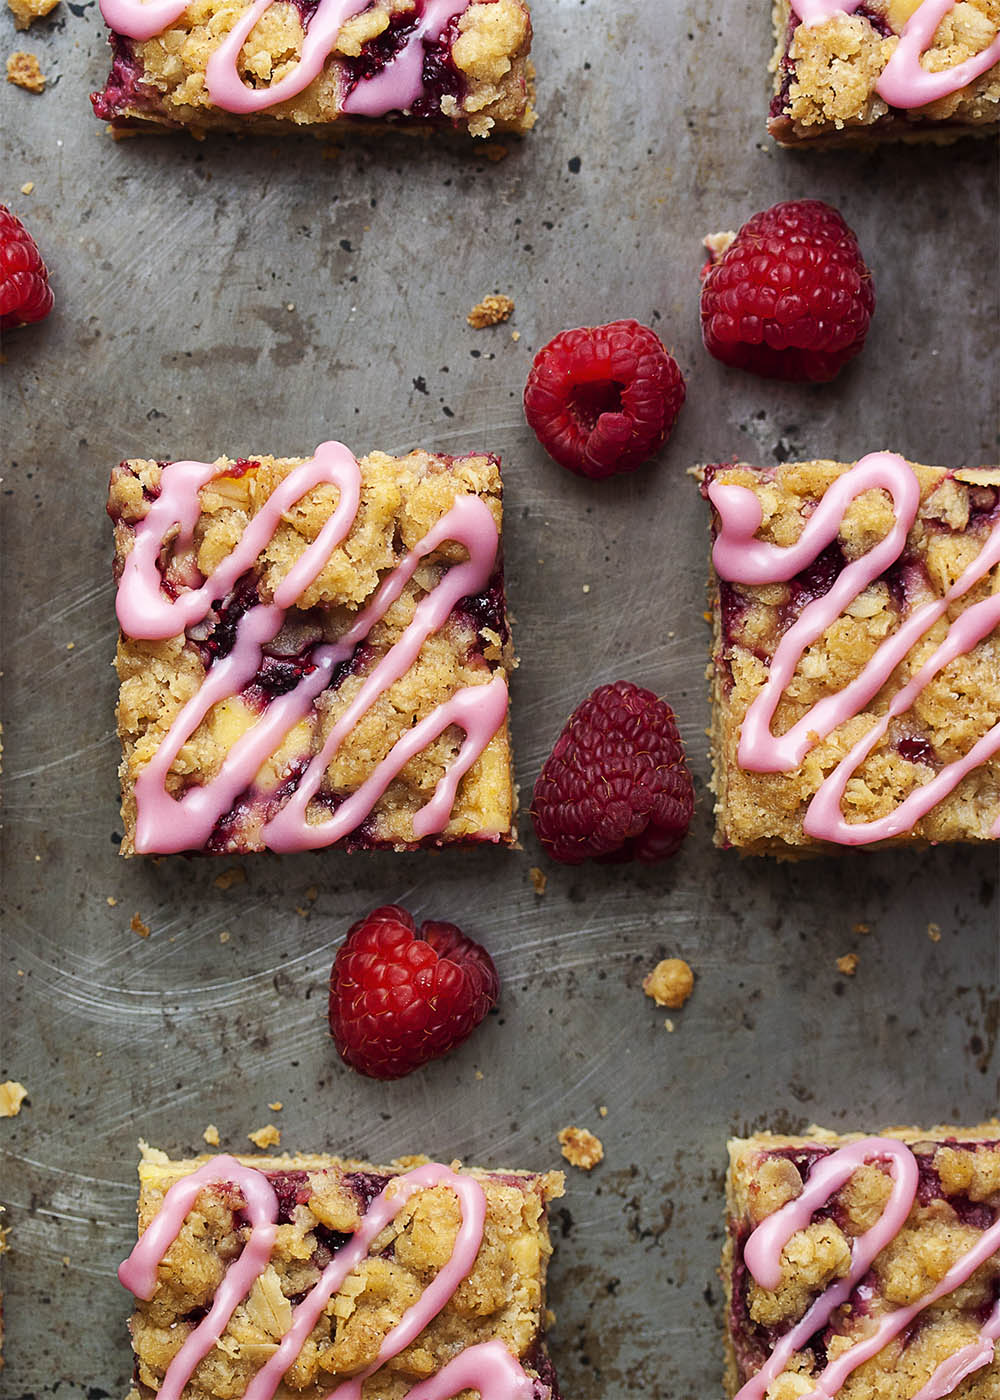 Raspberry Orange Streusel Bars - Raspberries pair with an orange cream filling and are topped by an oatmeal streusel in these flavorful and easy bar cookies. And, to make them extra fun and colorful, you can drizzle them with a raspberry glaze! | justalittlebitofbacon.com